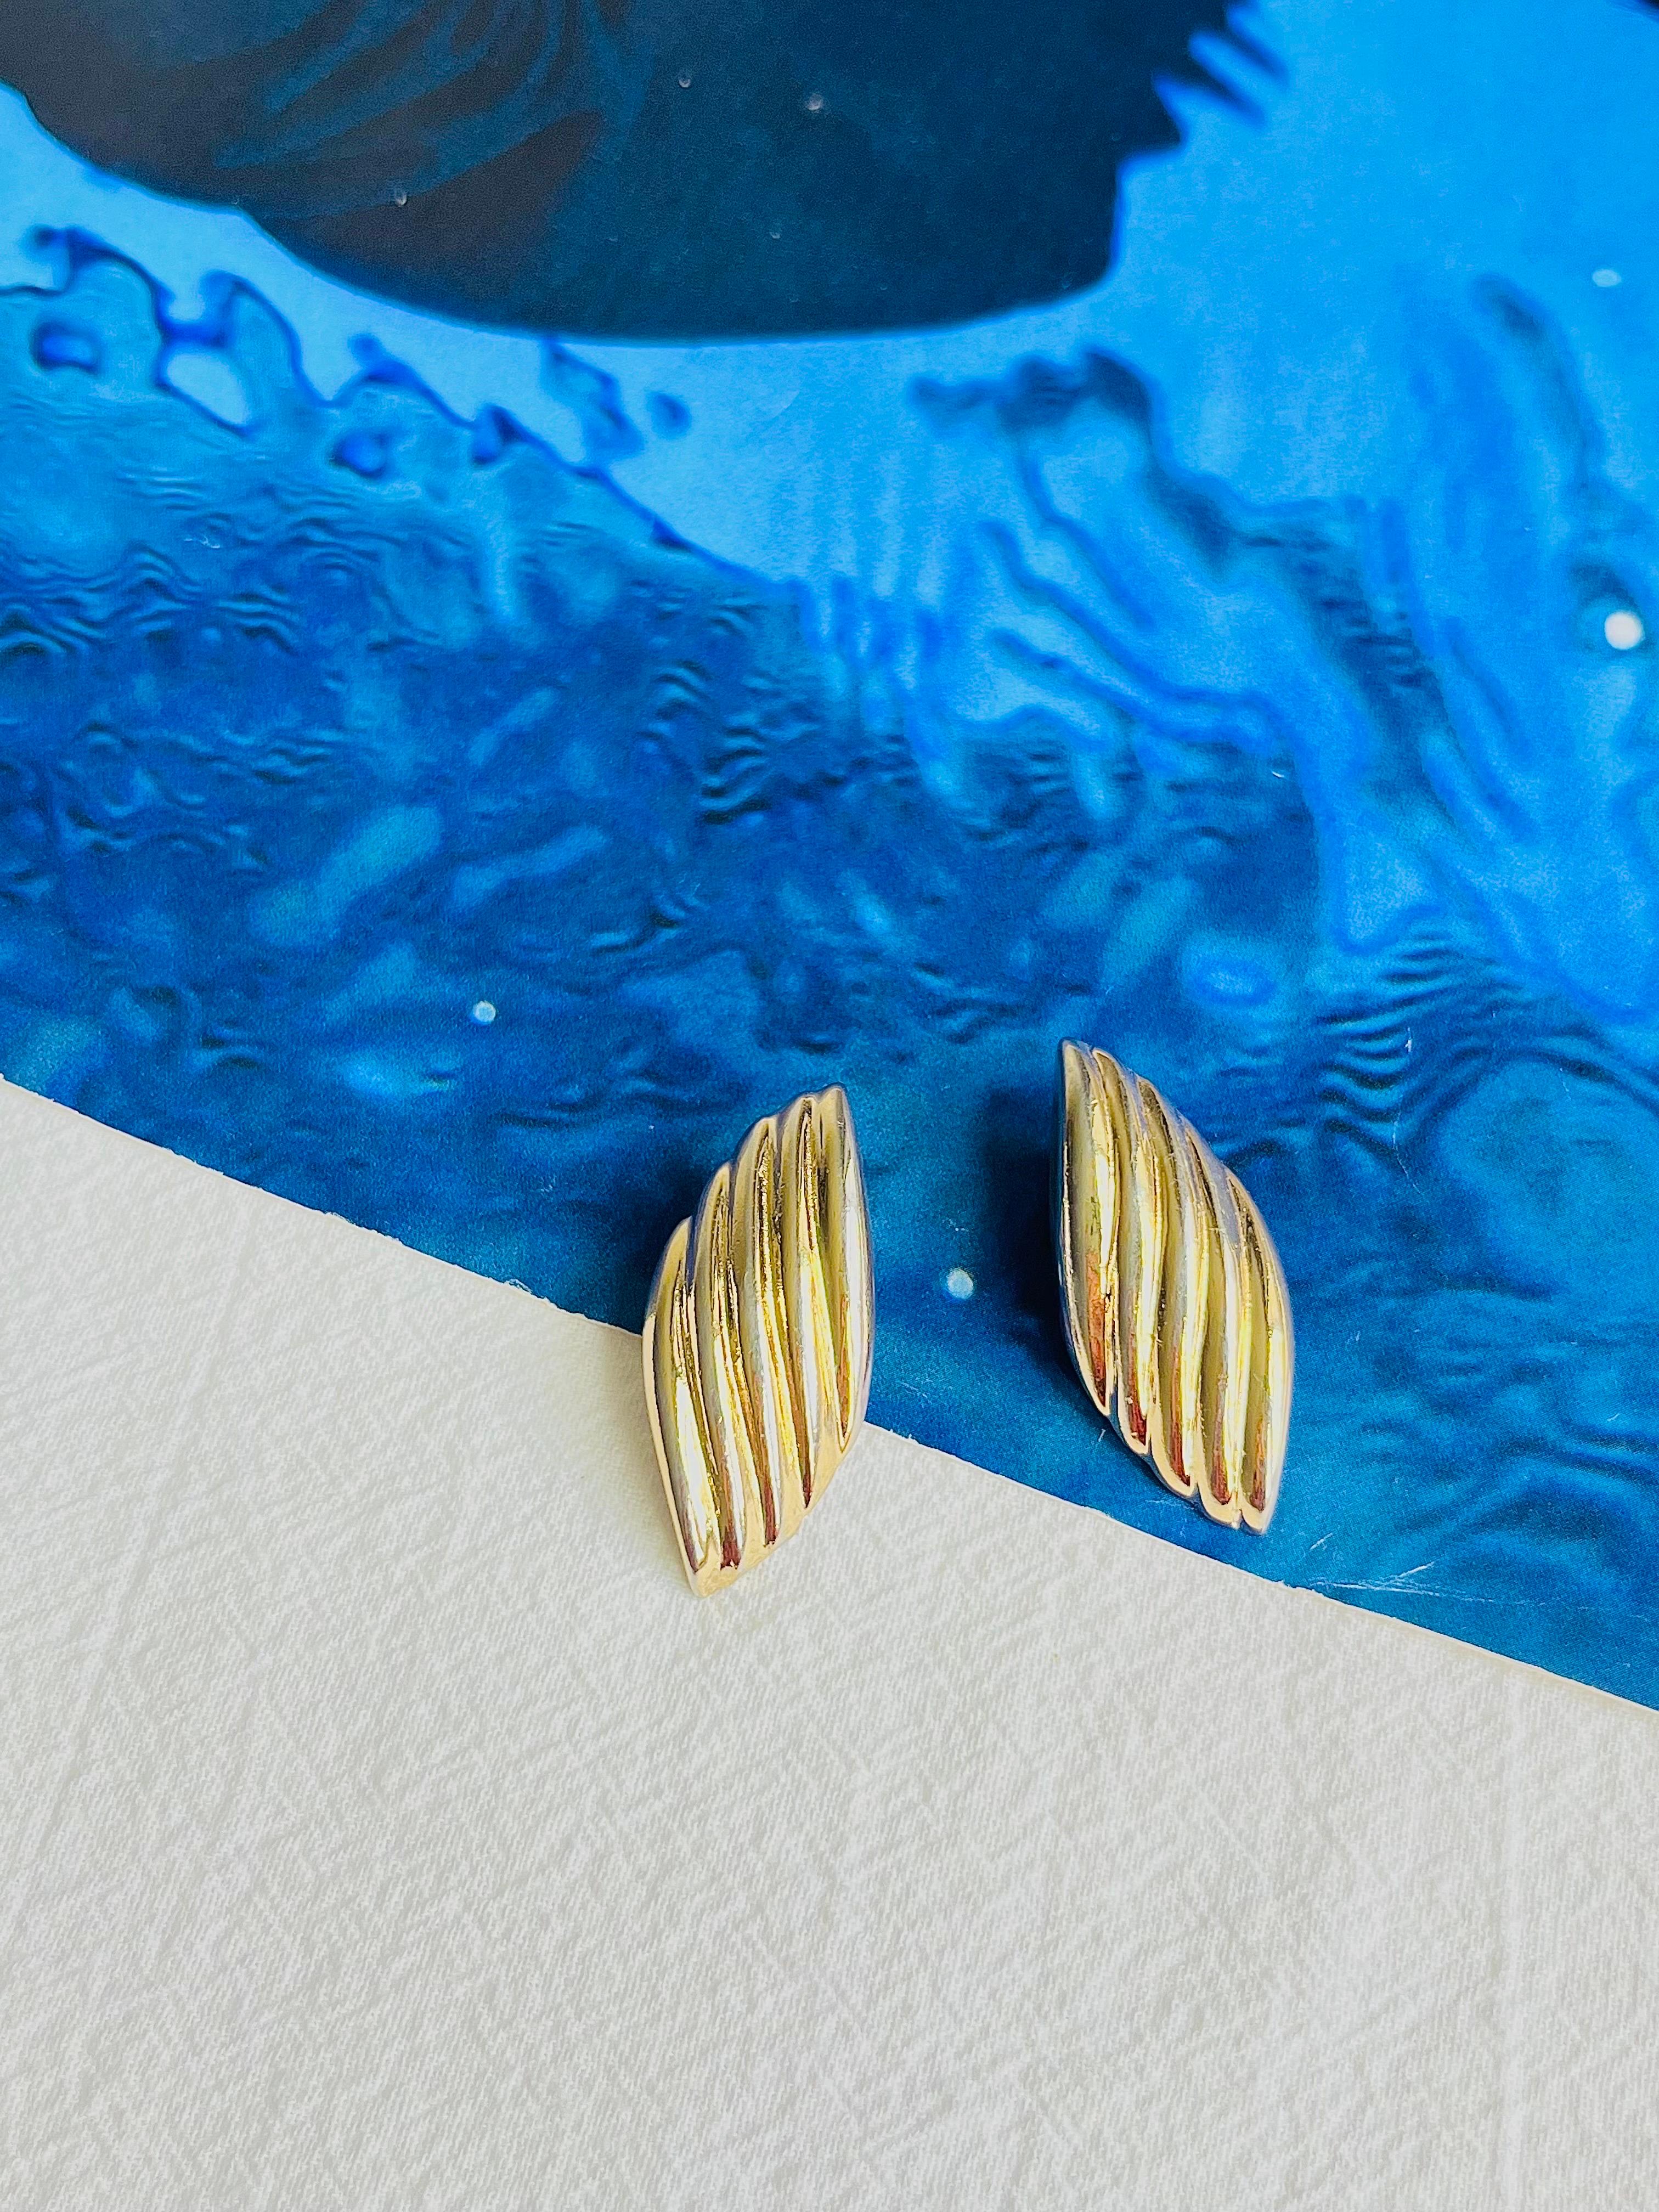 Christian Dior Vintage 1980s Large Spiral Shell Leaf Modernist Clip Earrings In Good Condition For Sale In Wokingham, England